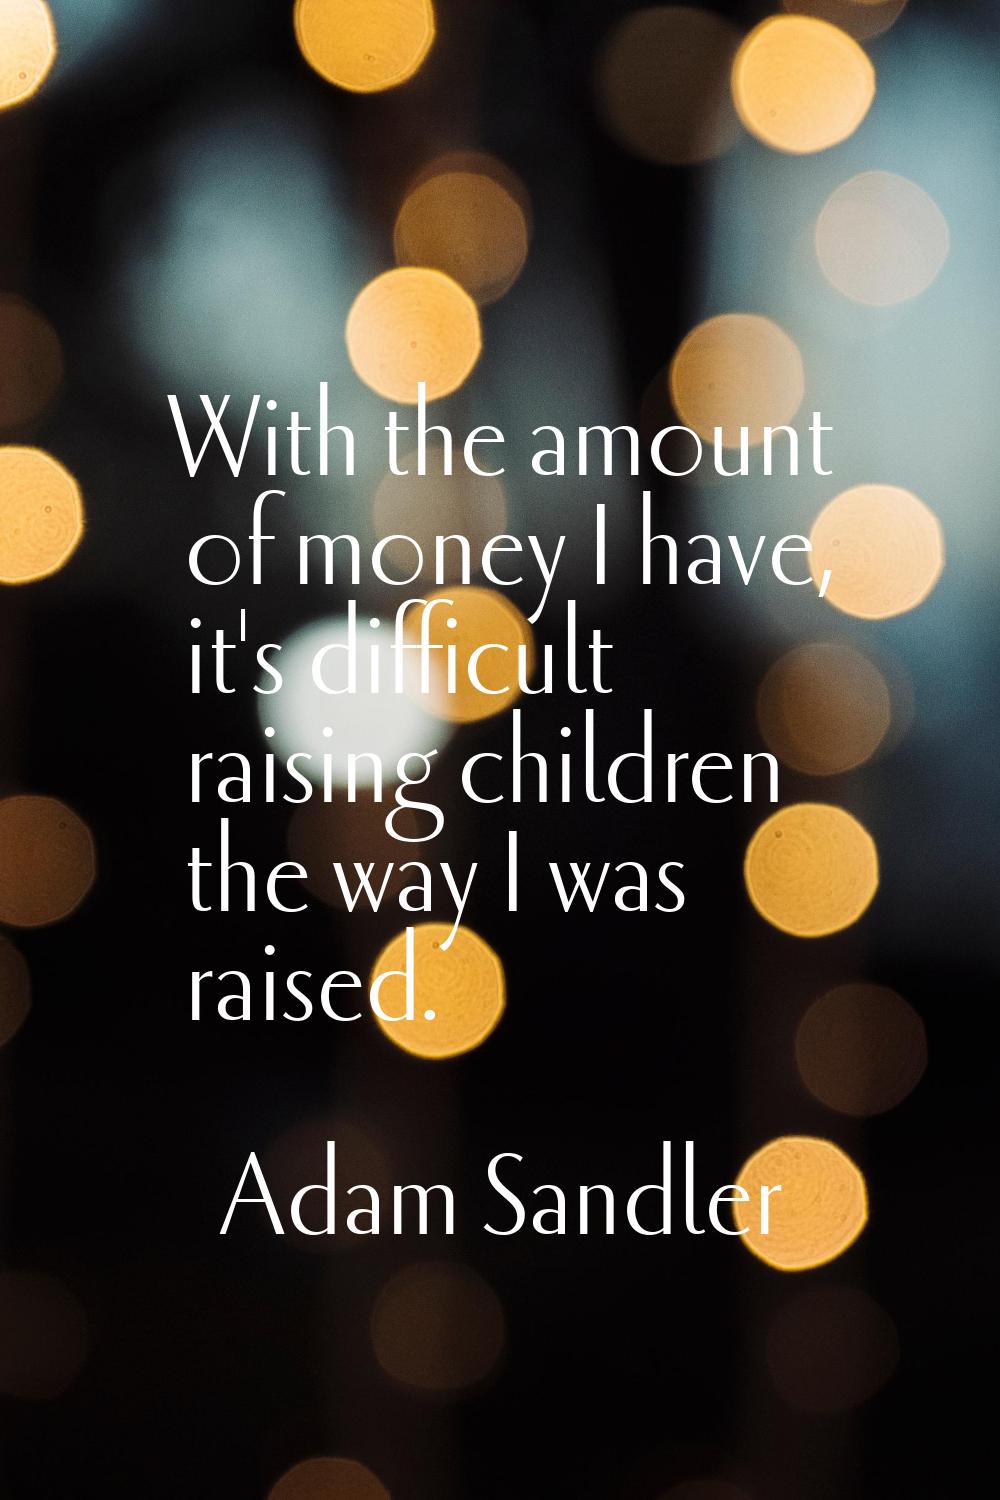 With the amount of money I have, it's difficult raising children the way I was raised.